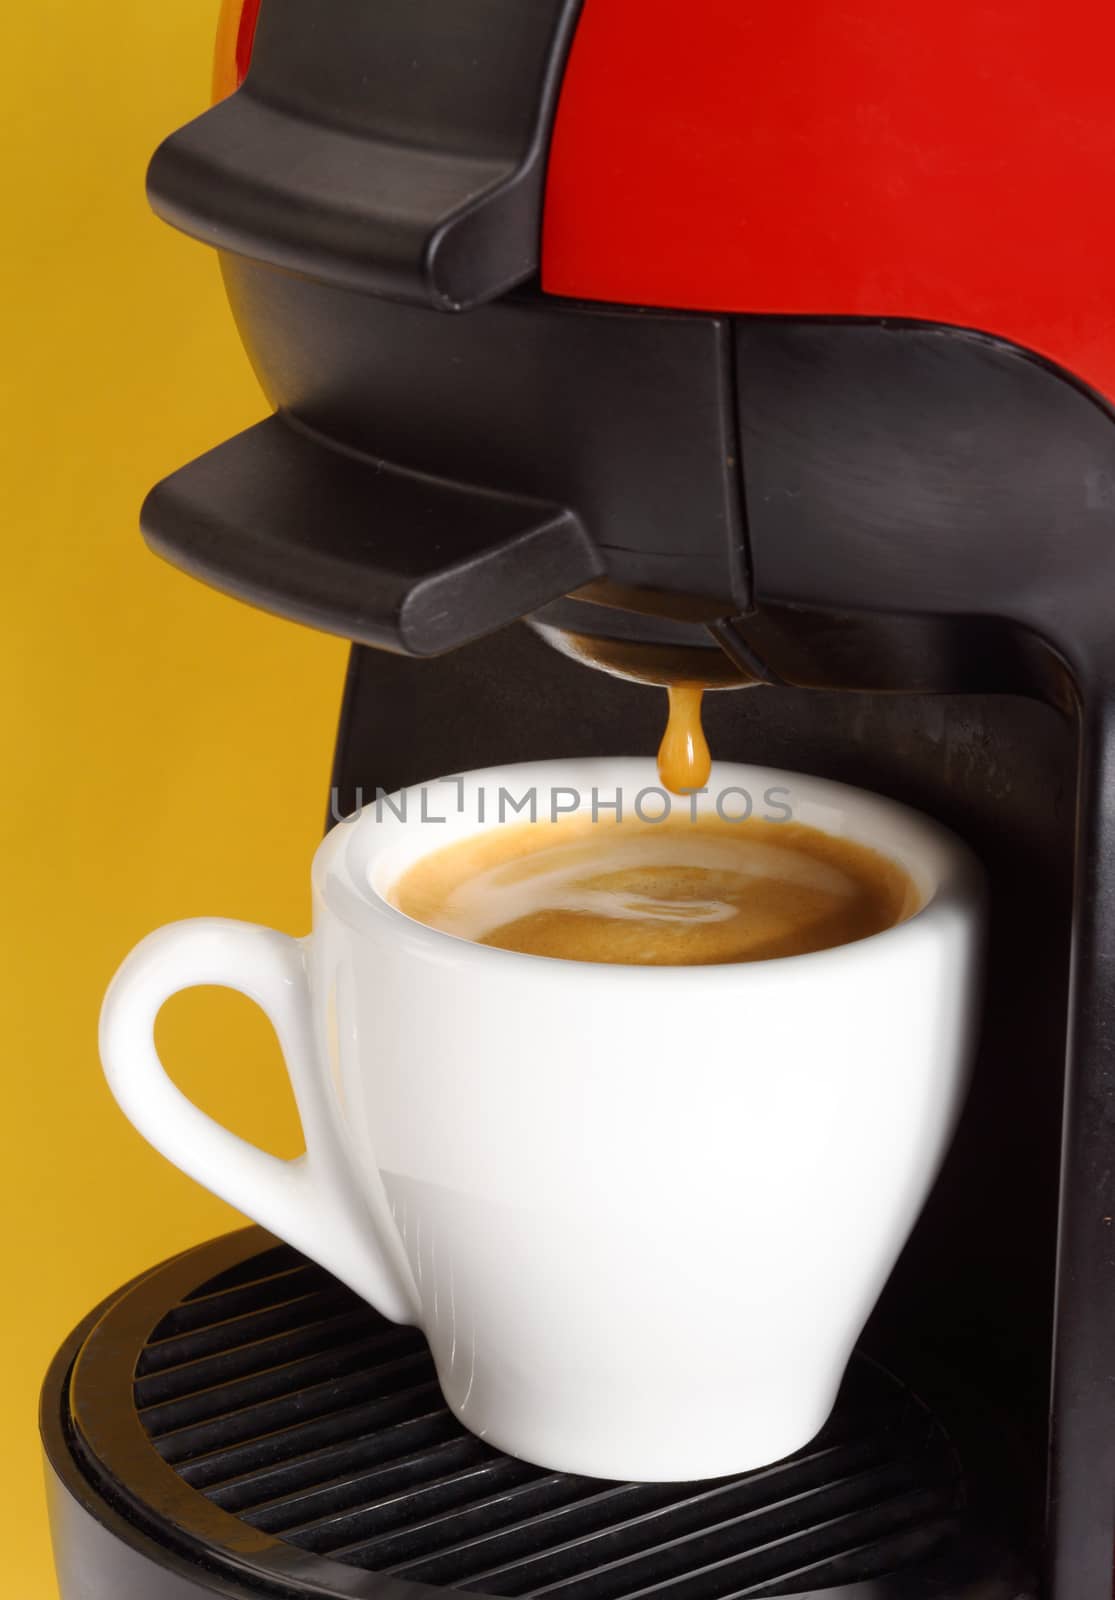 Espresso coffee maker in actionclose up shallow dof